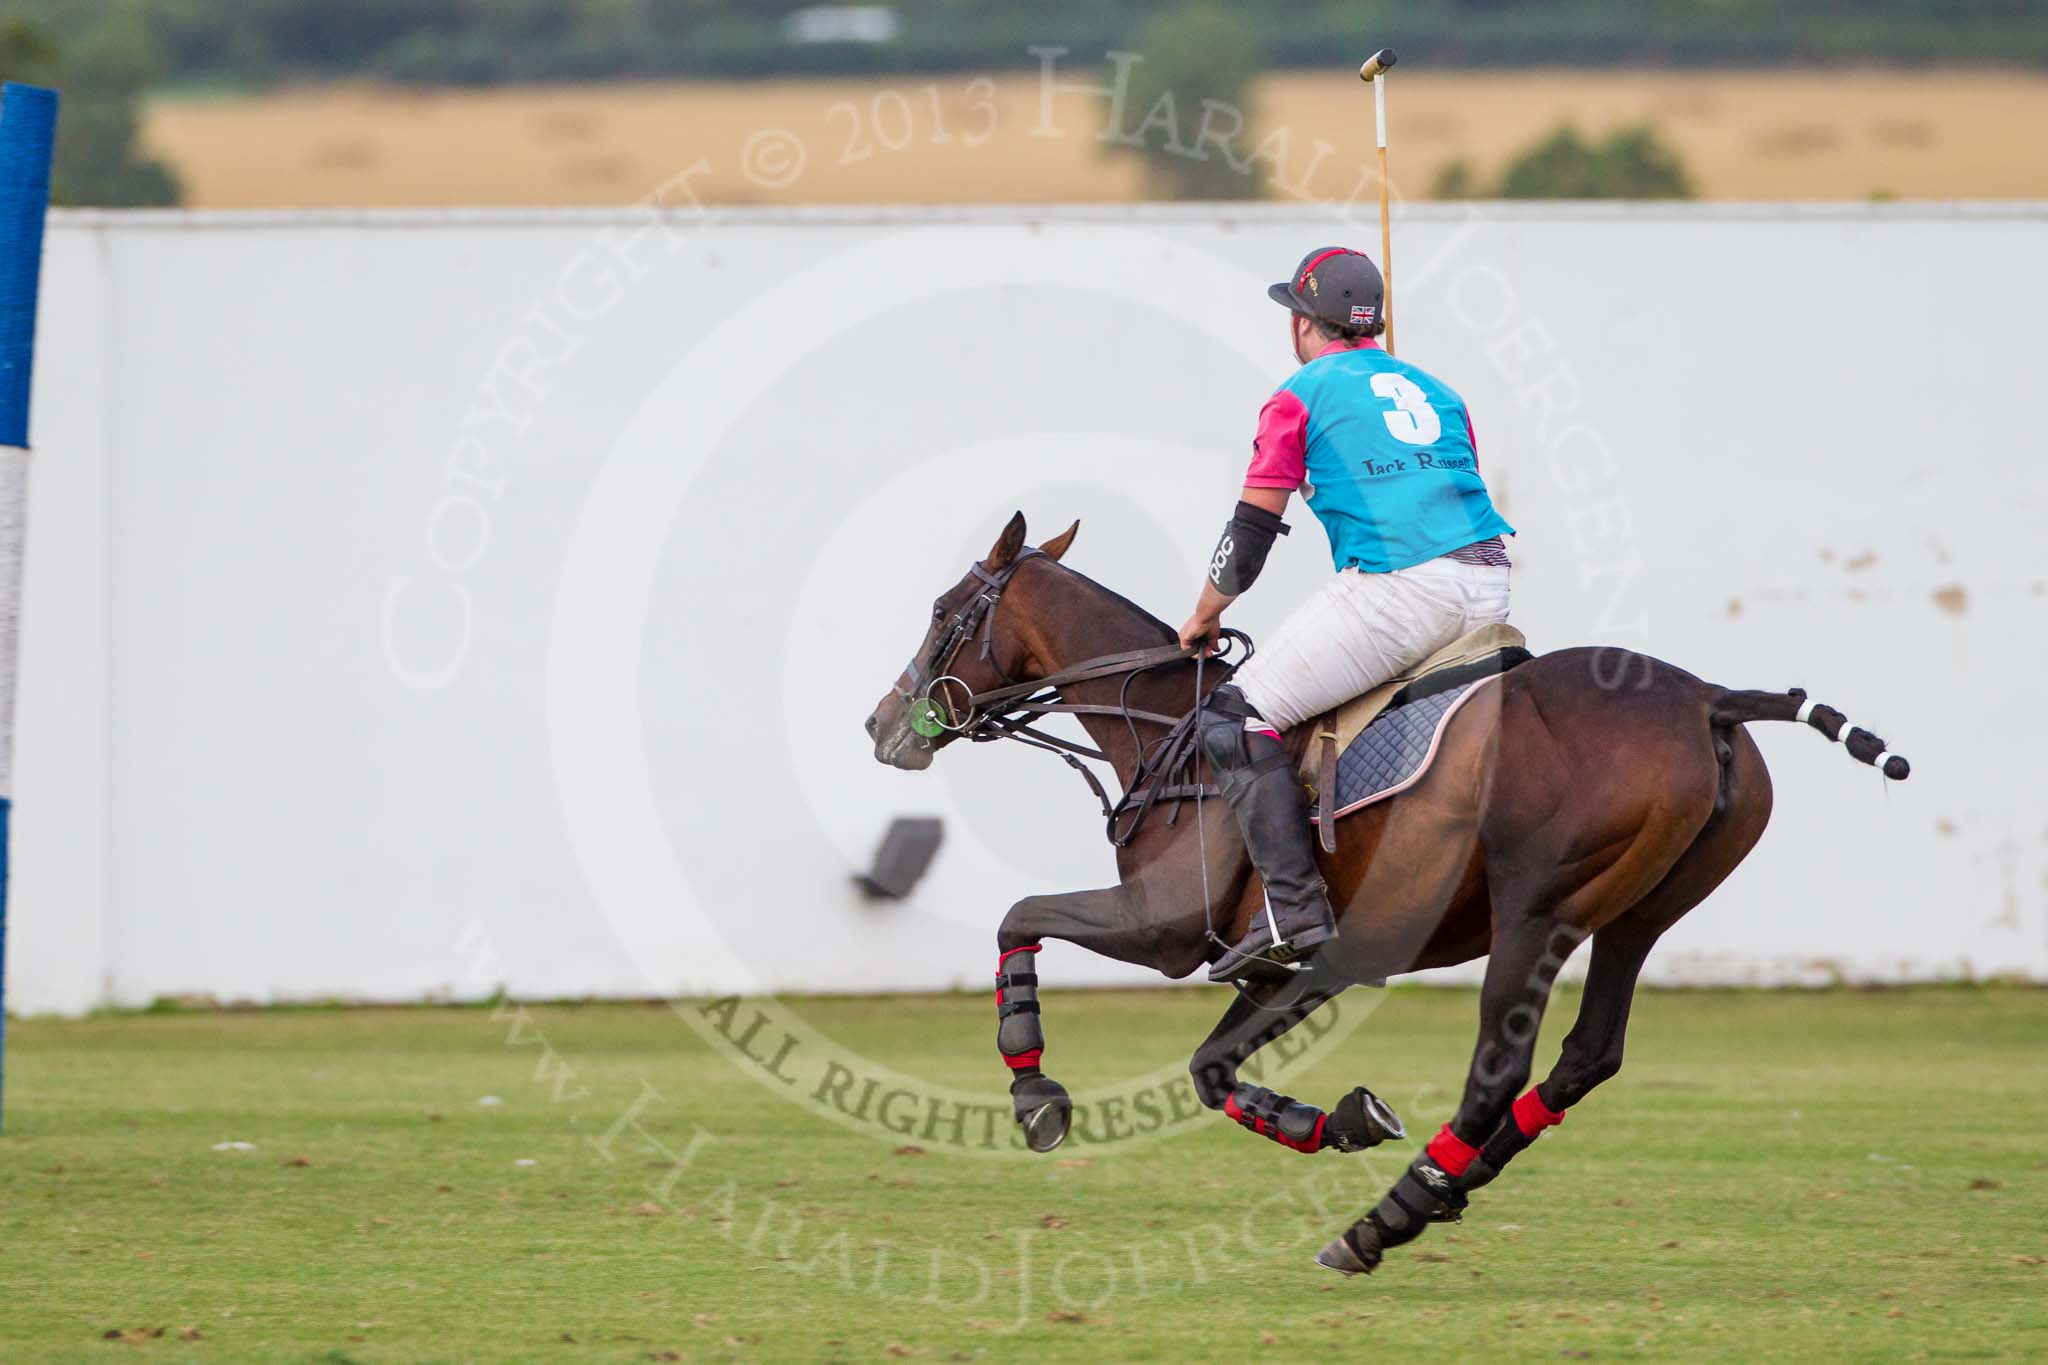 DBPC Polo in the Park 2013, Subsidiary Final Tusk Trophy (4 Goal), Dawson Group vs High Point.
Dallas Burston Polo Club, ,
Southam,
Warwickshire,
United Kingdom,
on 01 September 2013 at 18:18, image #681